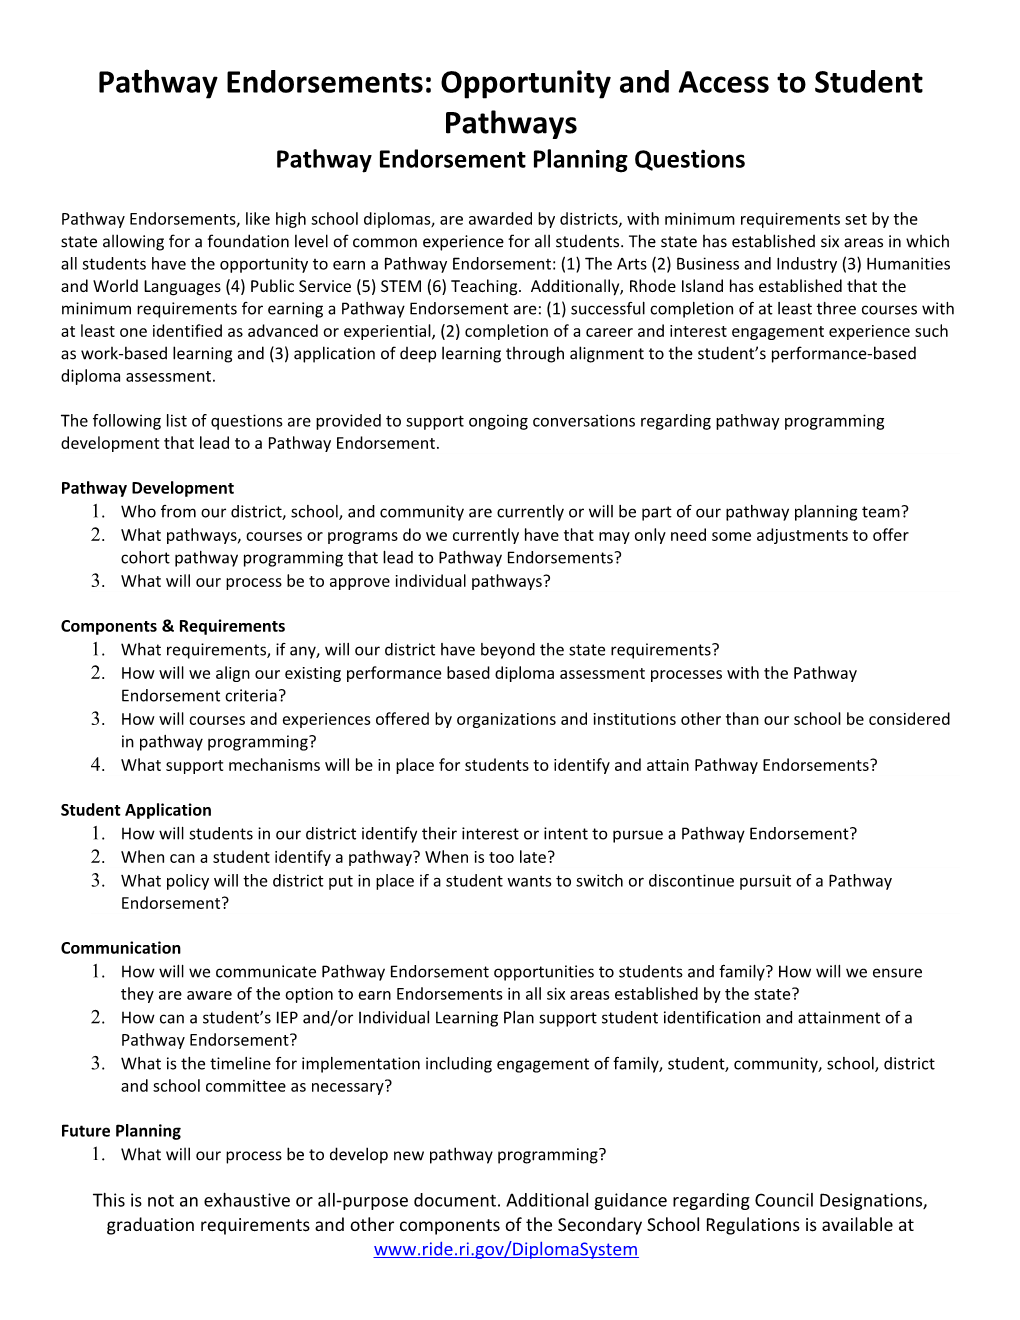 Pathway Endorsements: Opportunity and Access to Student Pathways